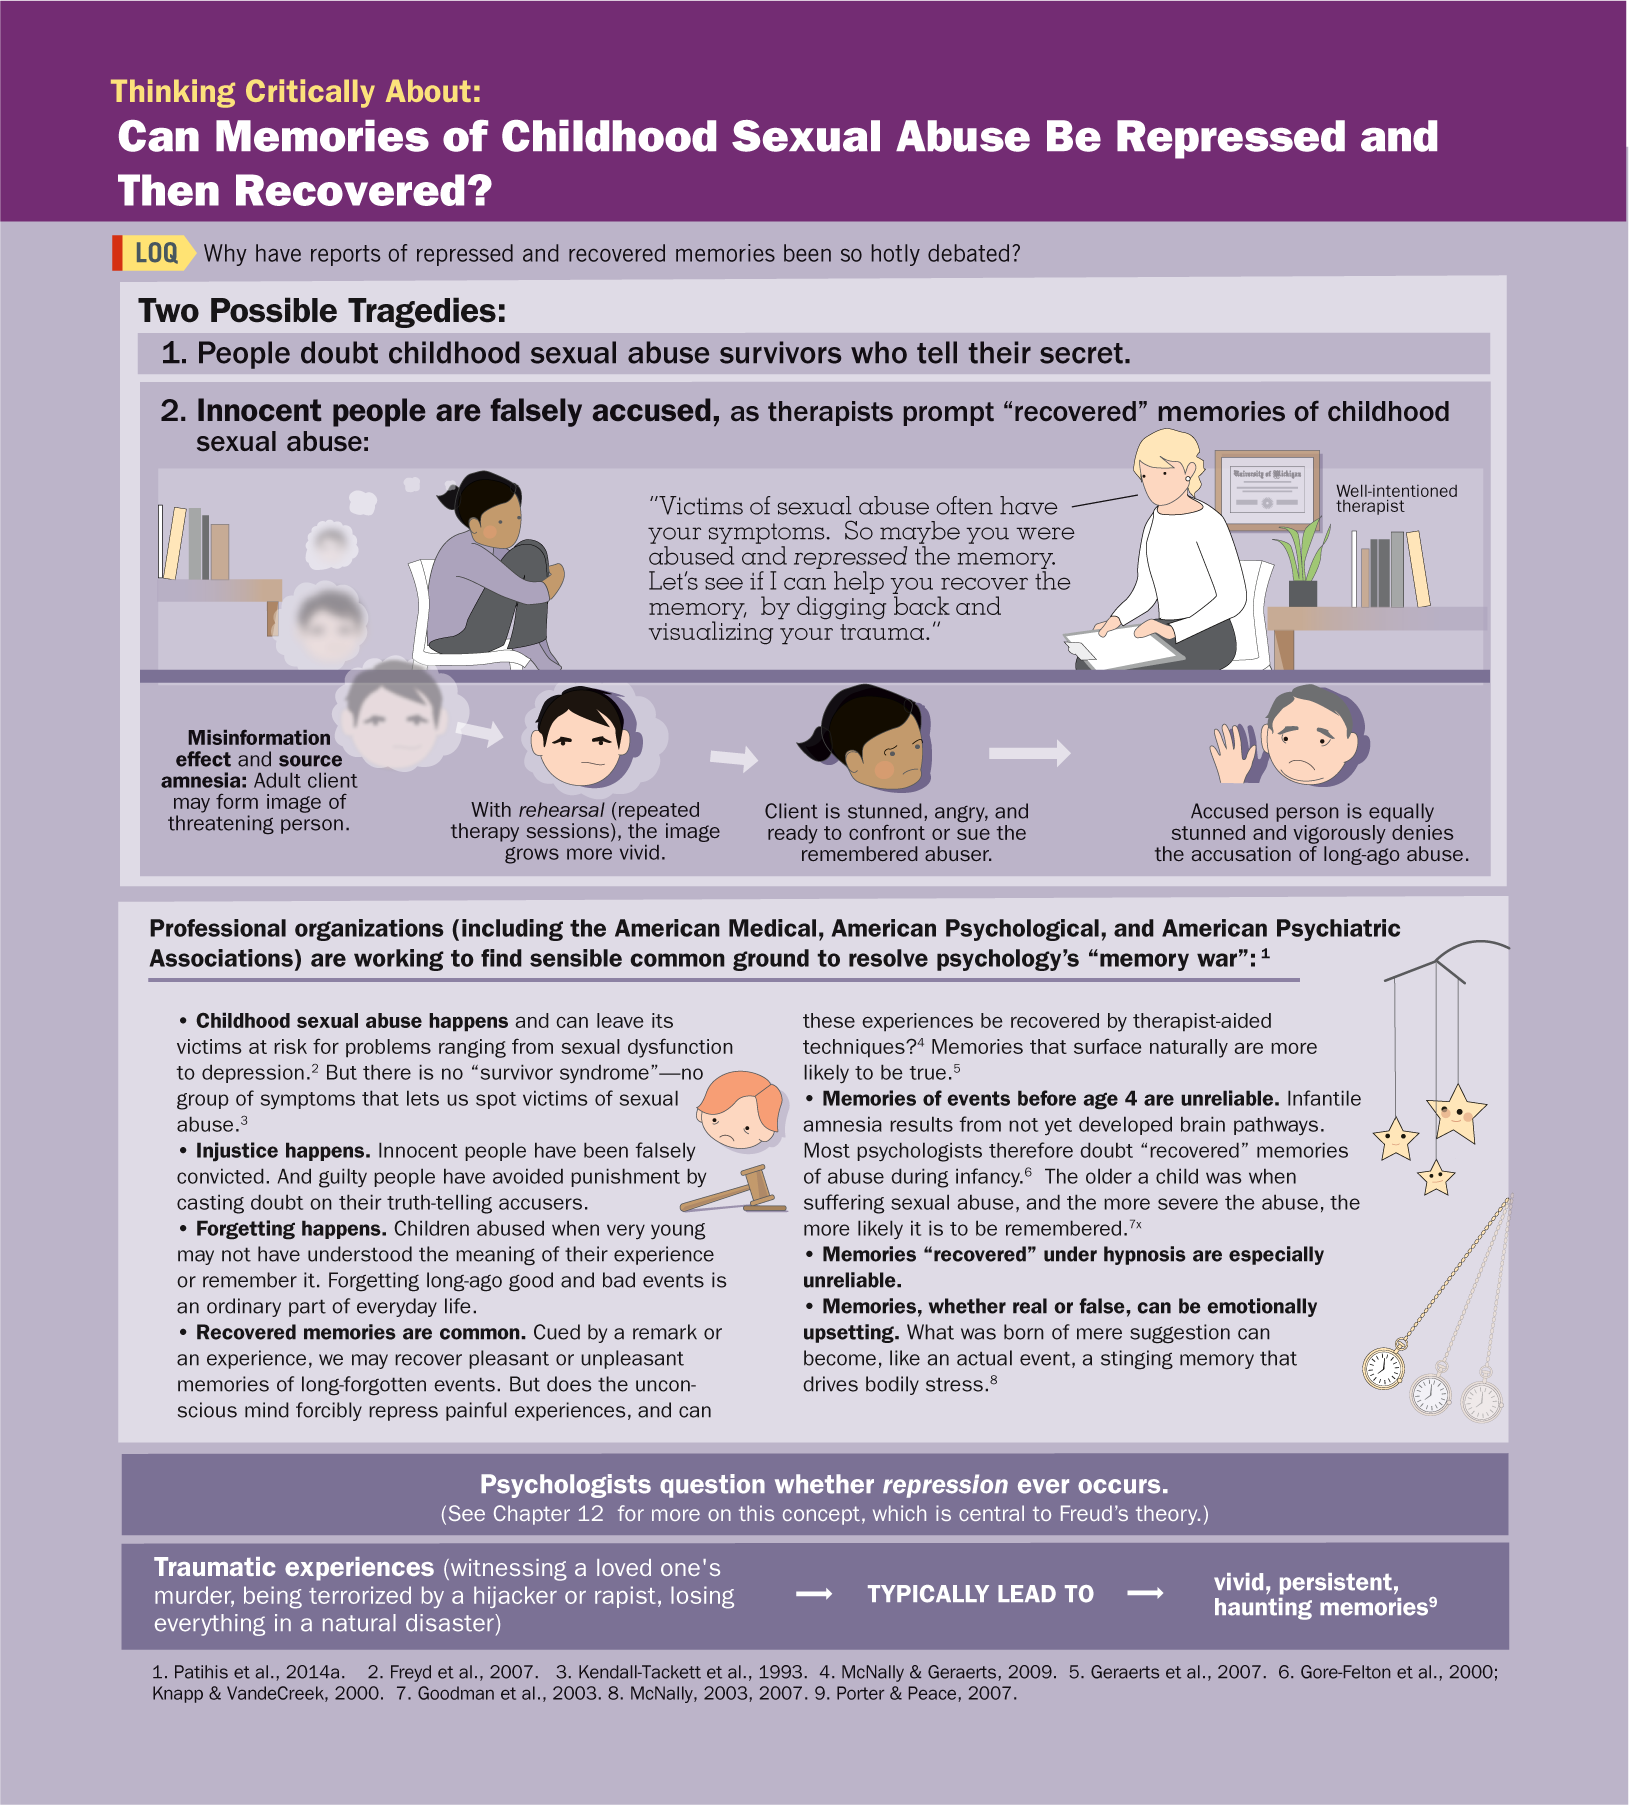 An infographic presents a critical analysis on whether memories of childhood sexual abuse be repressed and then recovered. You can read full description from the link below